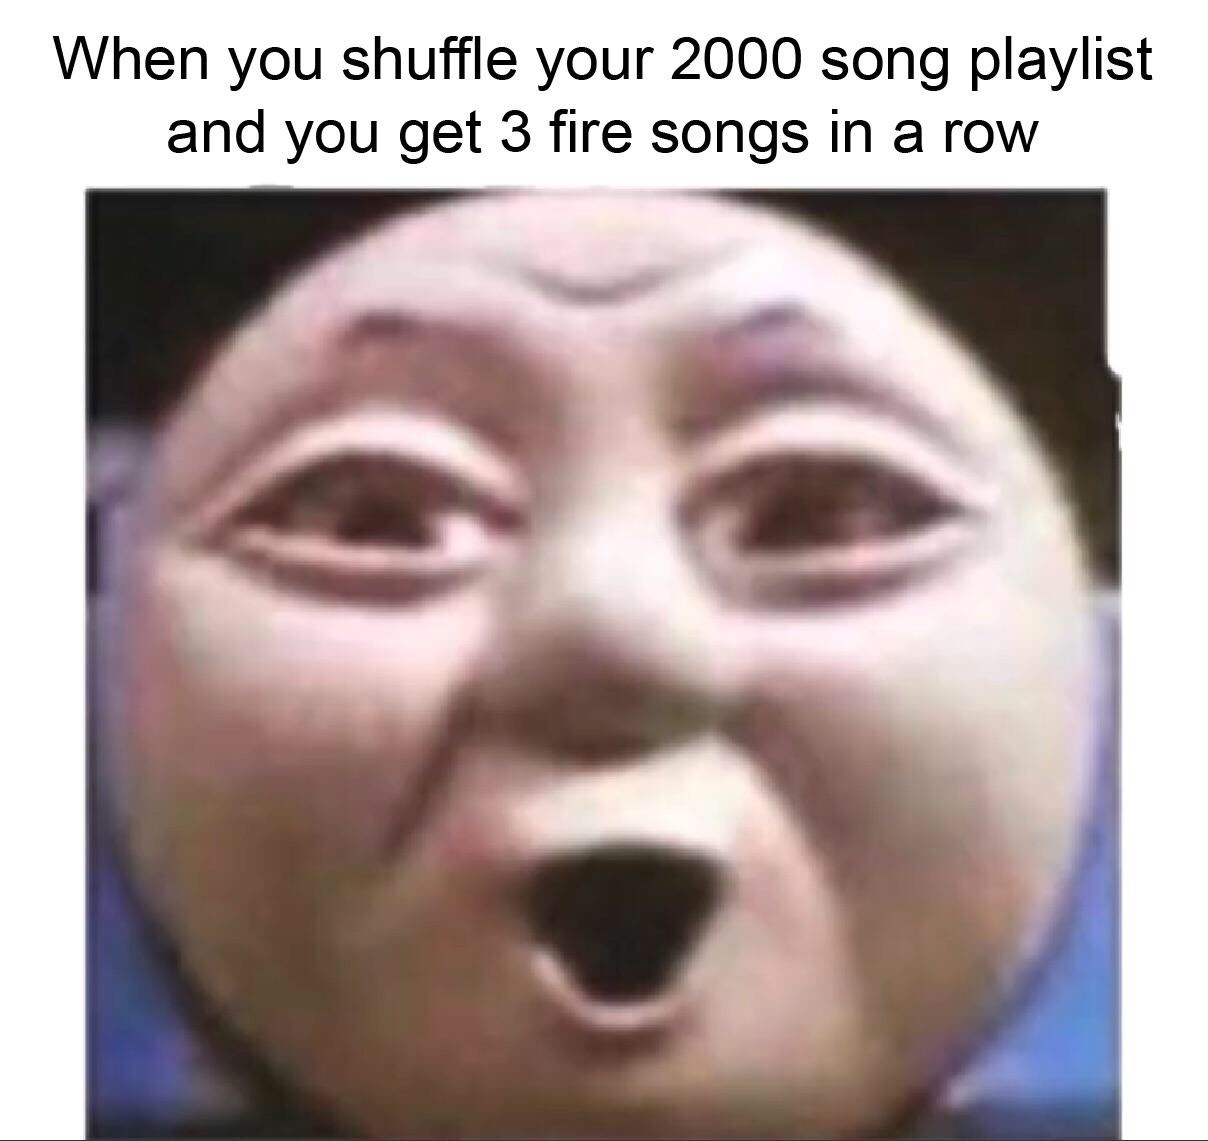 random meme - When you shuffle your 2000 song playlist and you get 3 fire songs in a row